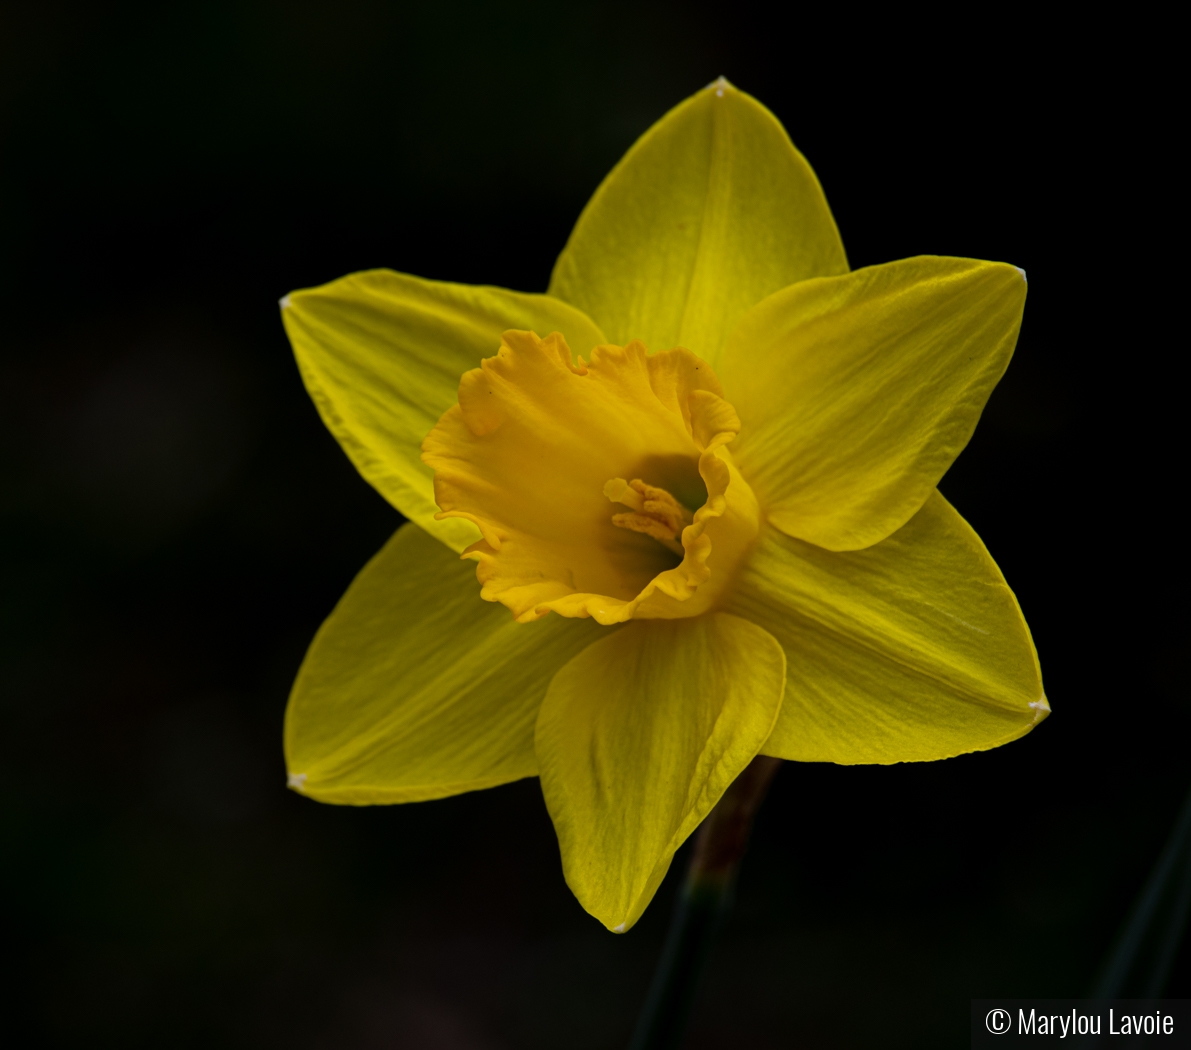 Daffodil by Marylou Lavoie